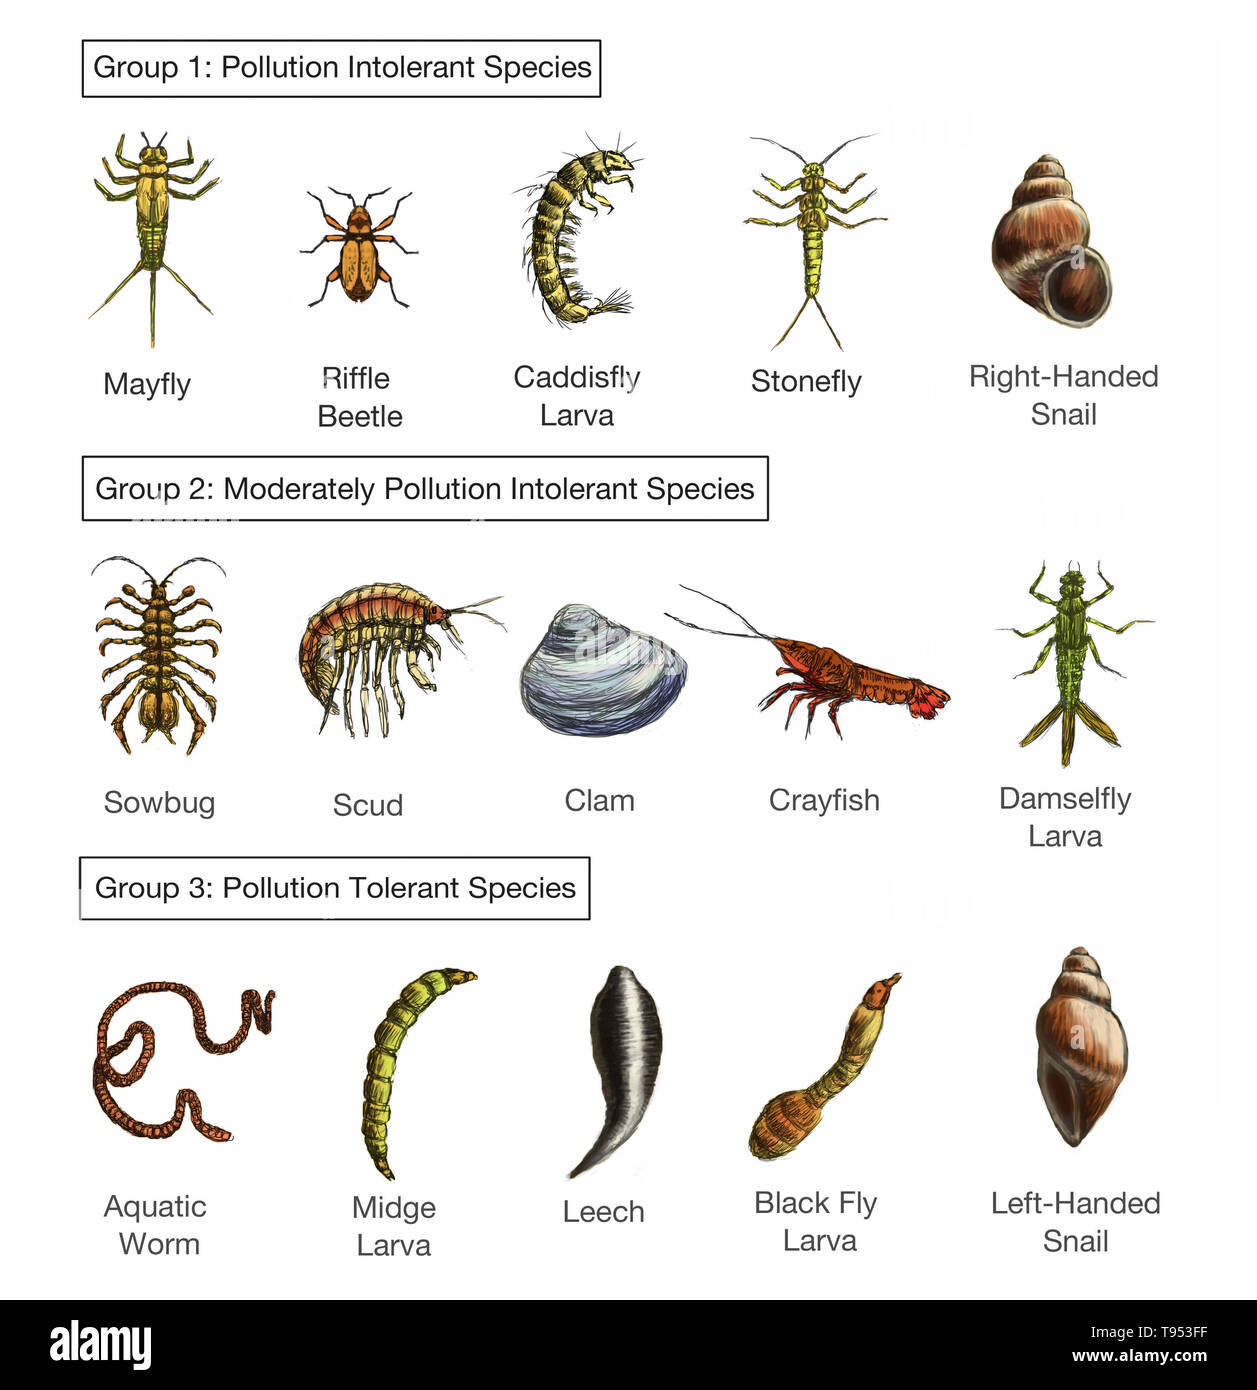 A chart showing the levels of pollution tolerance of various macroinvertebrates species. Stock Photo